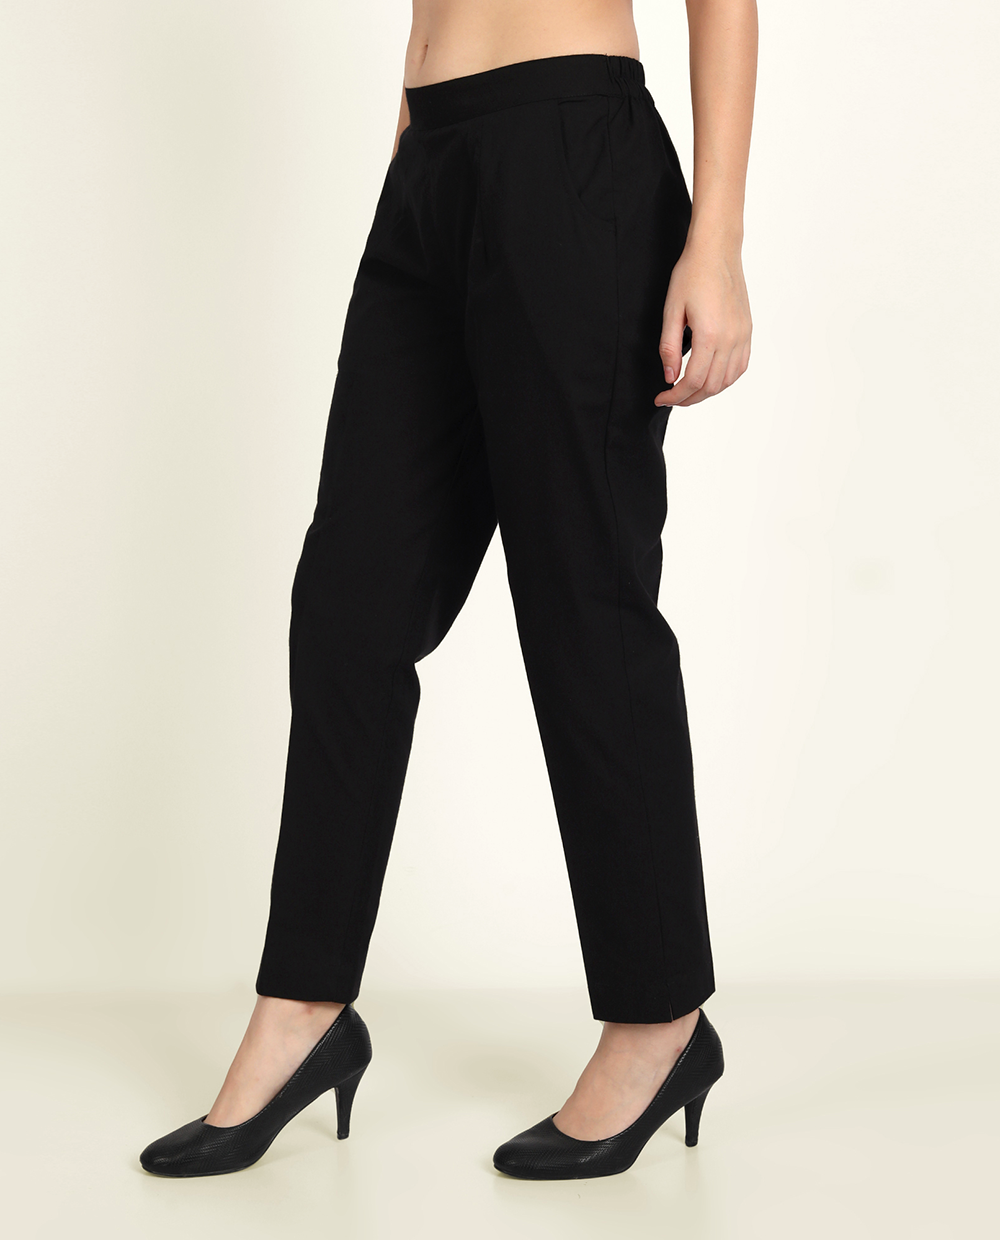 Buy Beige Crinkled Cotton Trousers For Women by Genes Lecoanet Hemant  Online at Aza Fashions.